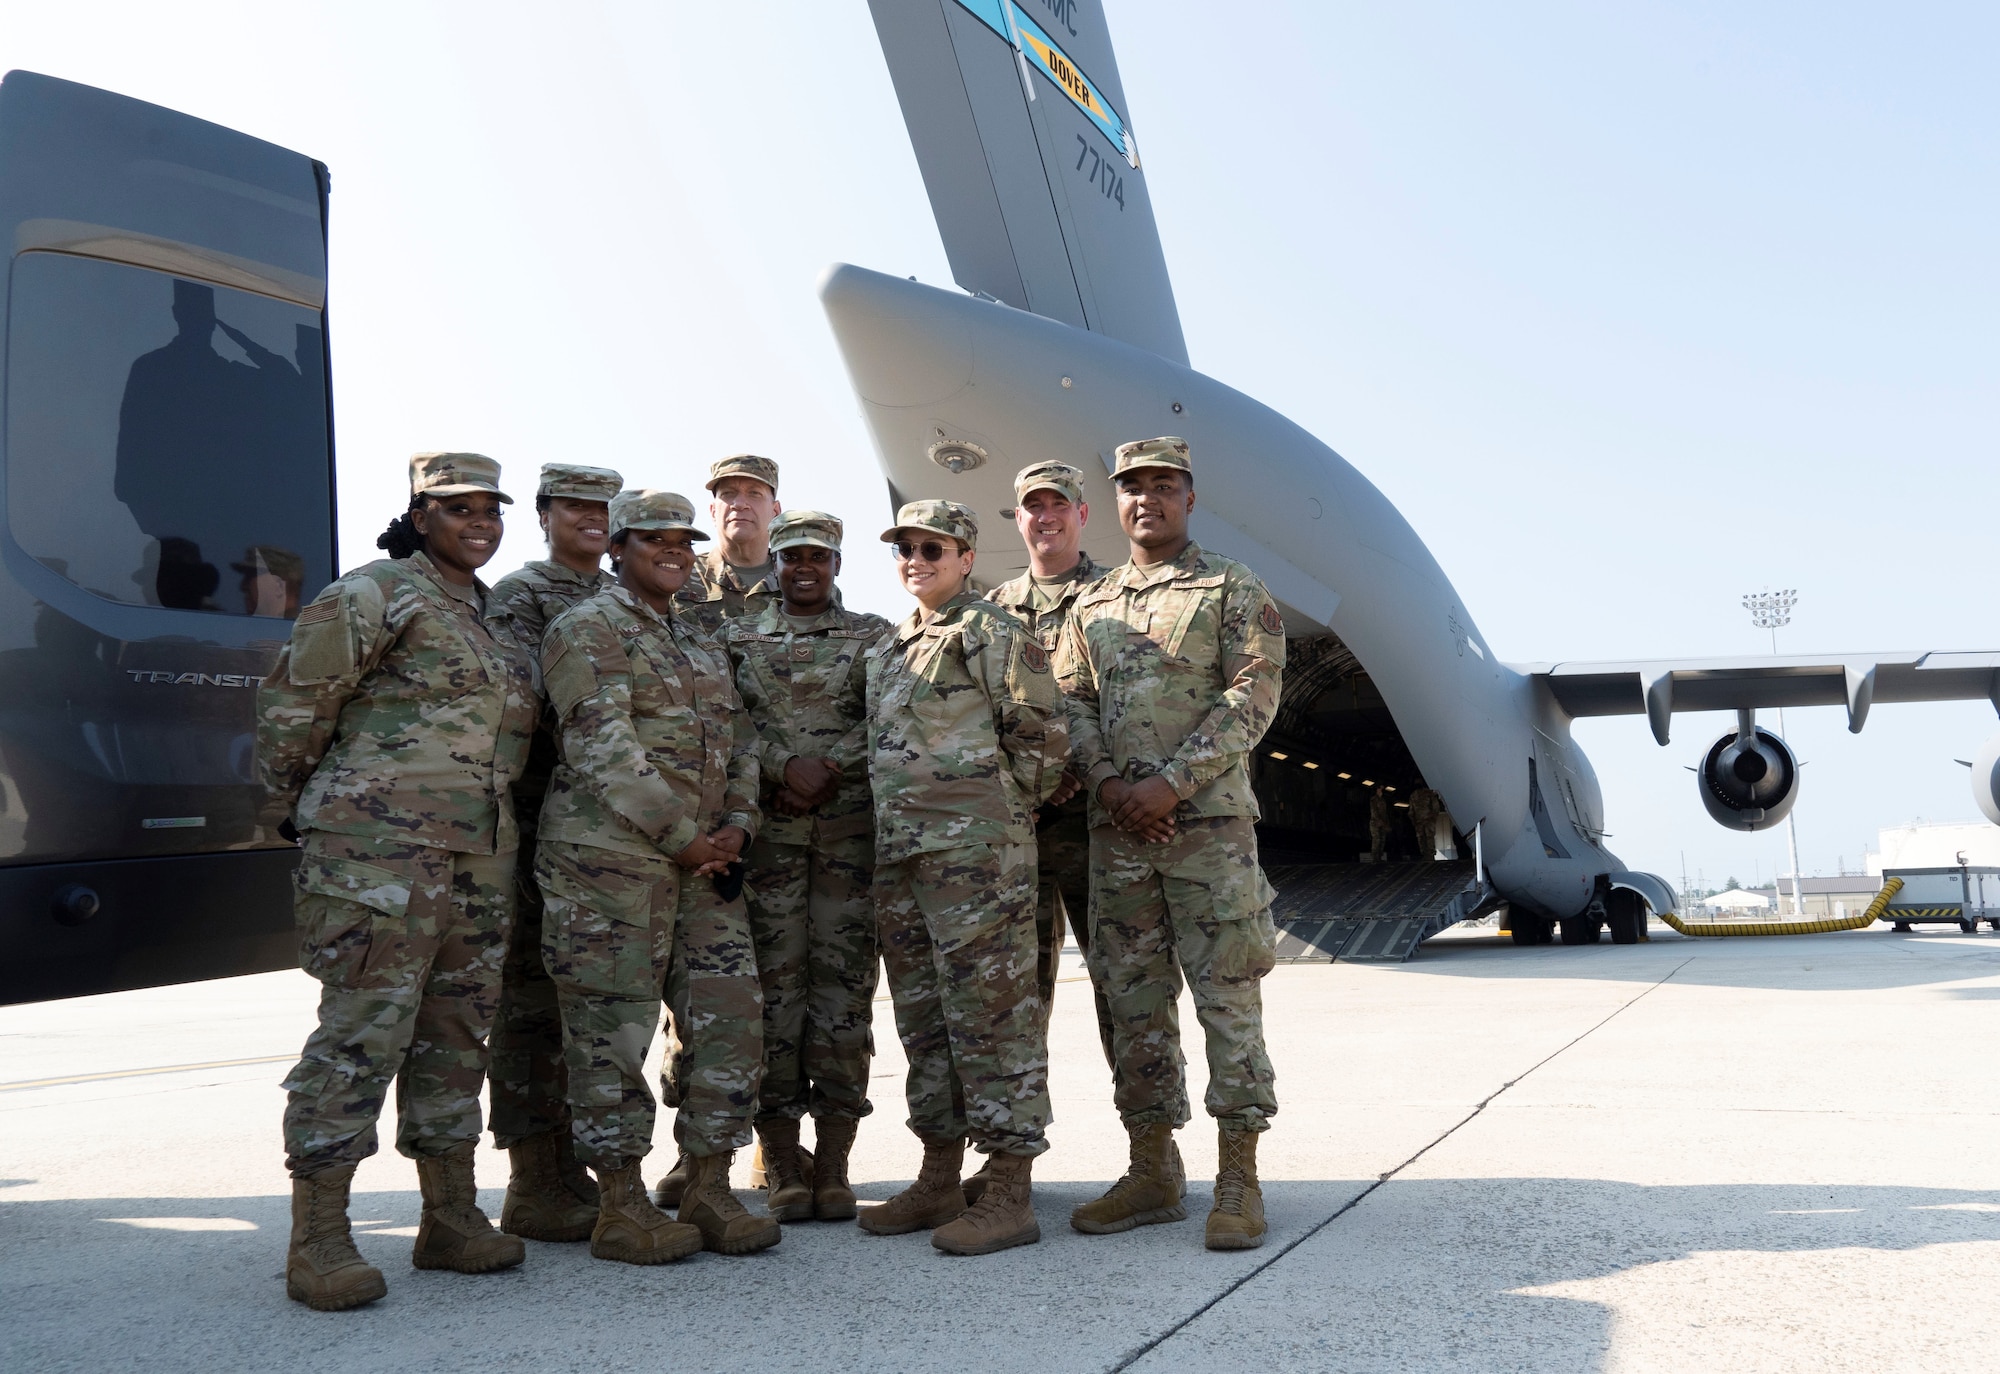 Members of the 914th Force Support Squadron, Niagara Falls International Airport Air Reserve Station, New York, participated in a training exercise as part of the Air Force Mortuary Affairs Operations Force Support Contingency Training at Dover Air Force Base, Delaware.